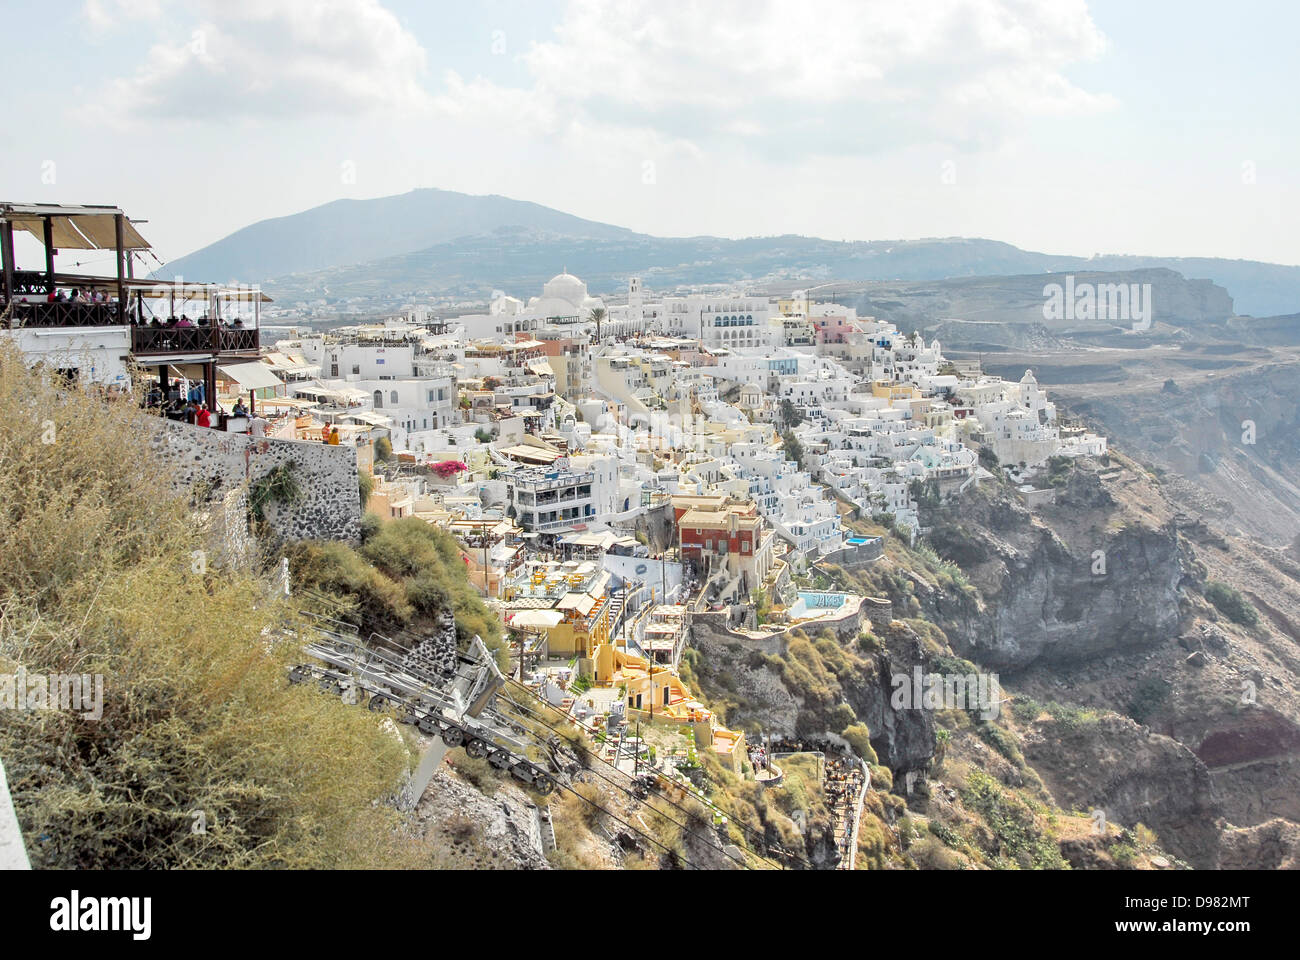 The Town of Fira on top of the cliffs on the Island of Santorini in the Aegean Sea, Greece Stock Photo